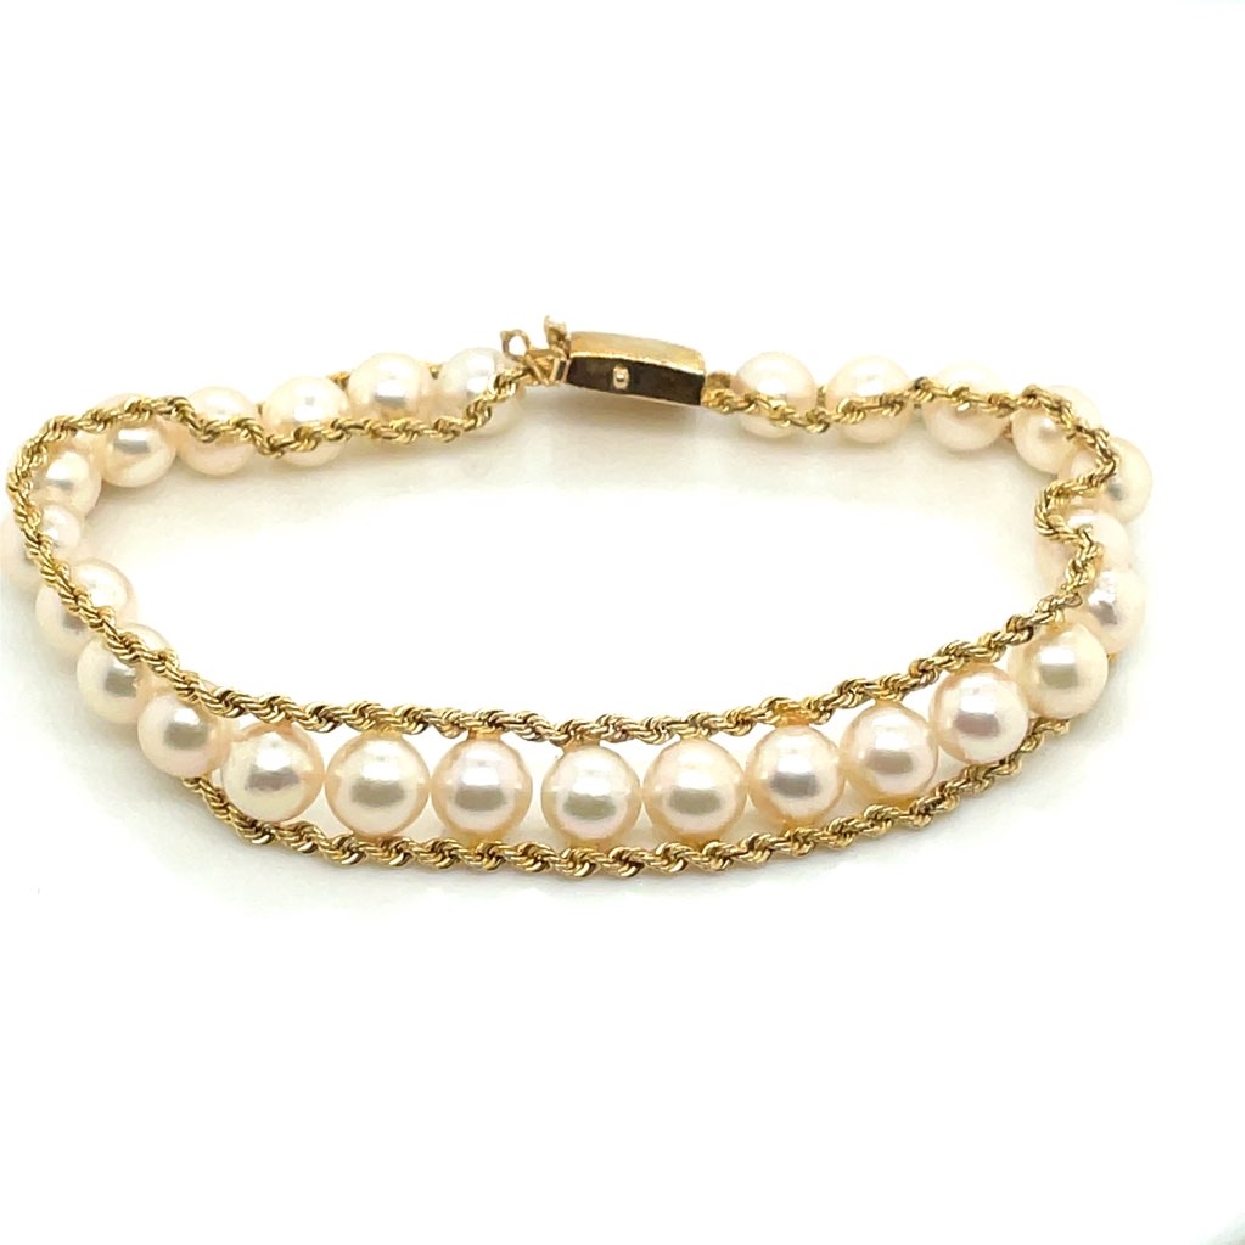 14K Yellow Gold Akoya Pearl Bracelet with Double Rope Chain Design 

7.5 Inches 